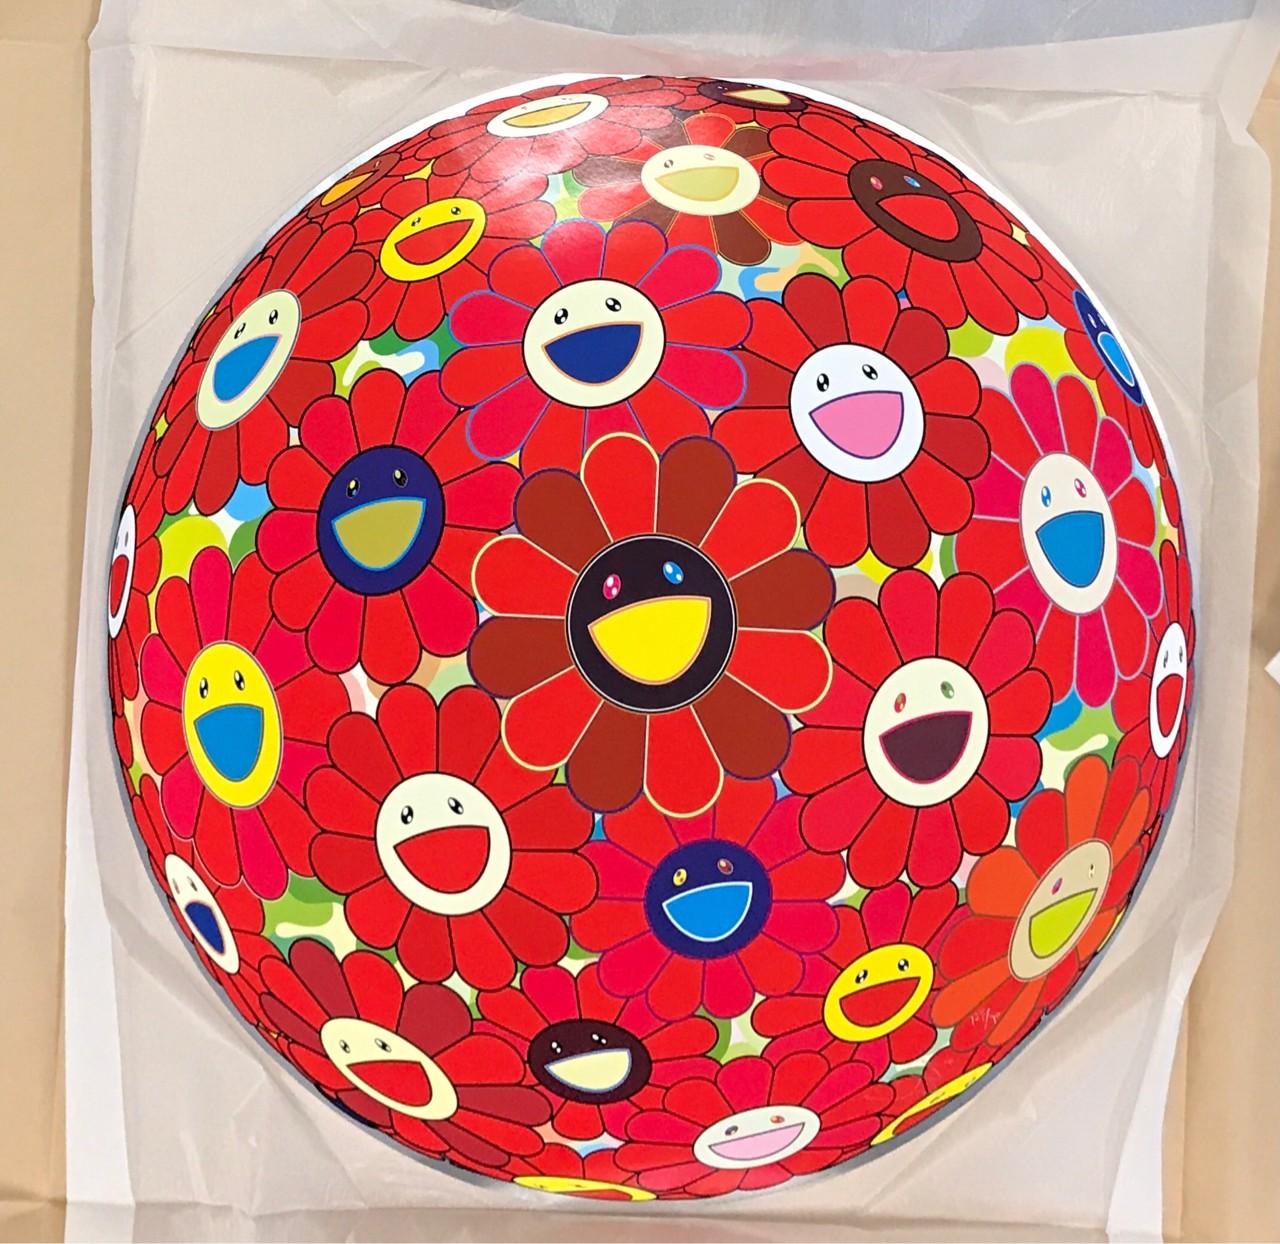 Red Flowerball (3D). Limited Edition (print) by Murakami signed and numbered. - Print by Takashi Murakami